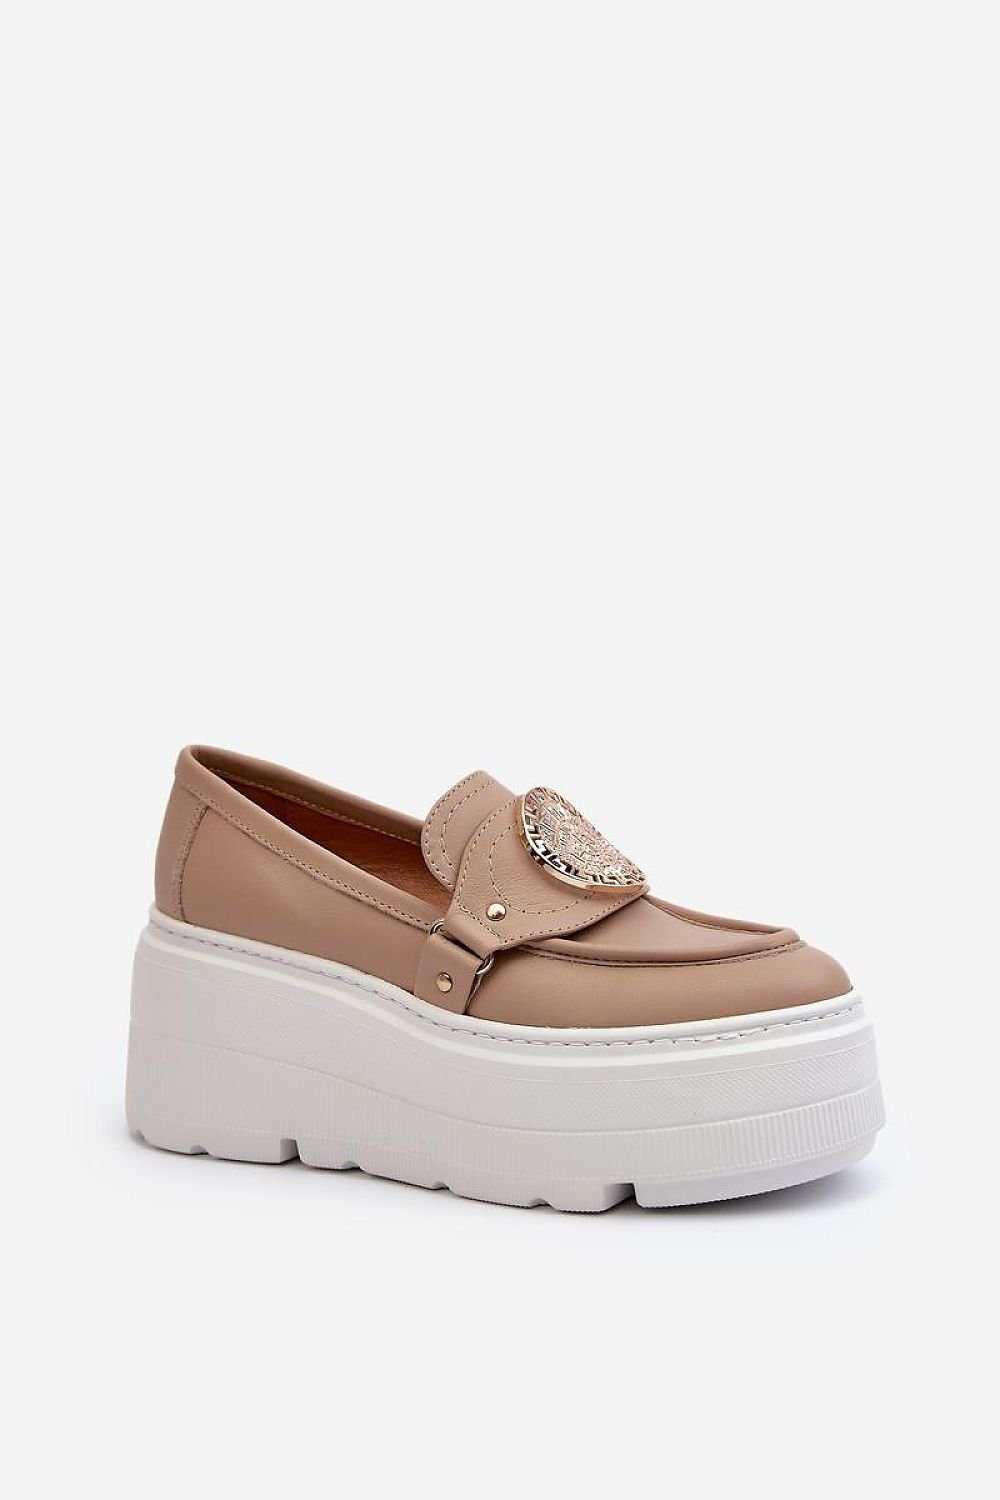 TEEK - Natural Leather Bold Piece Platform Loafers SHOES TEEK MH   